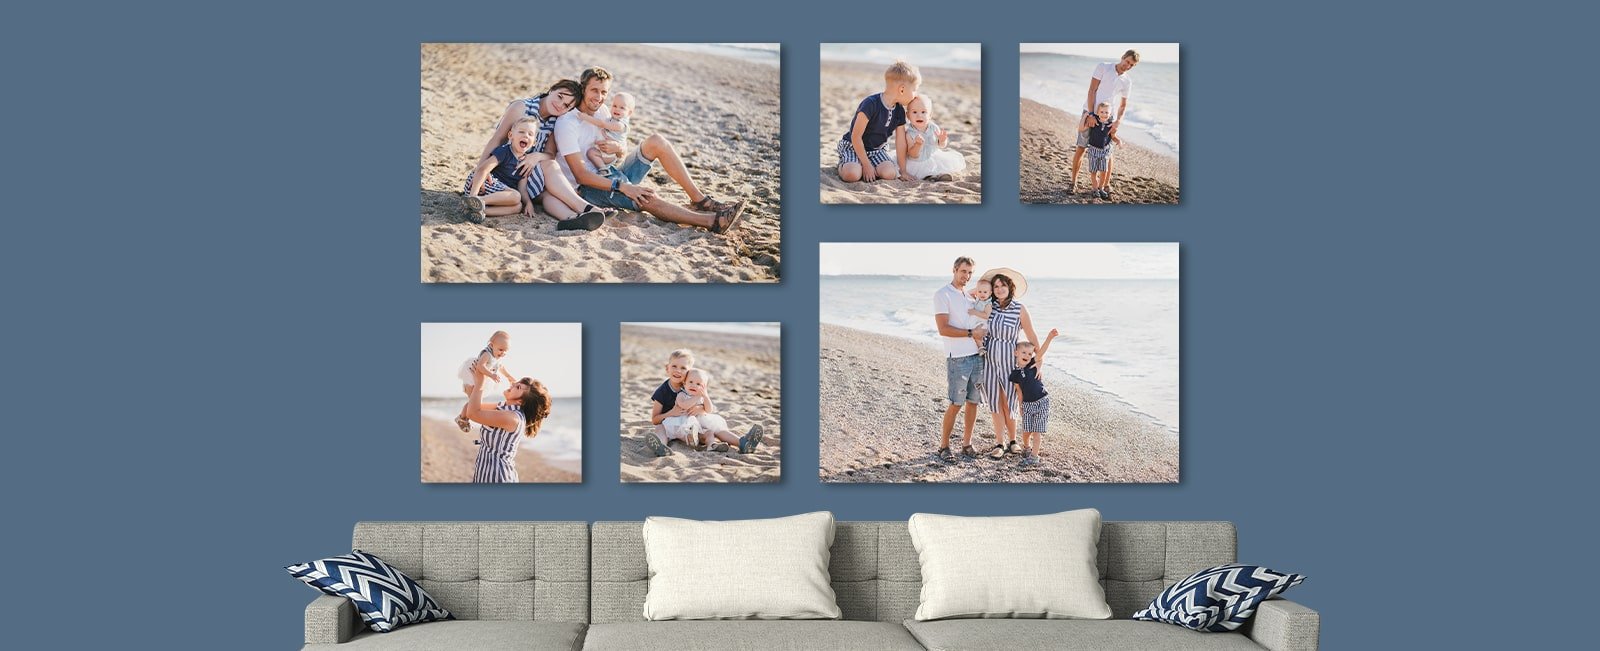 Ophelia Canvas Grouping Template